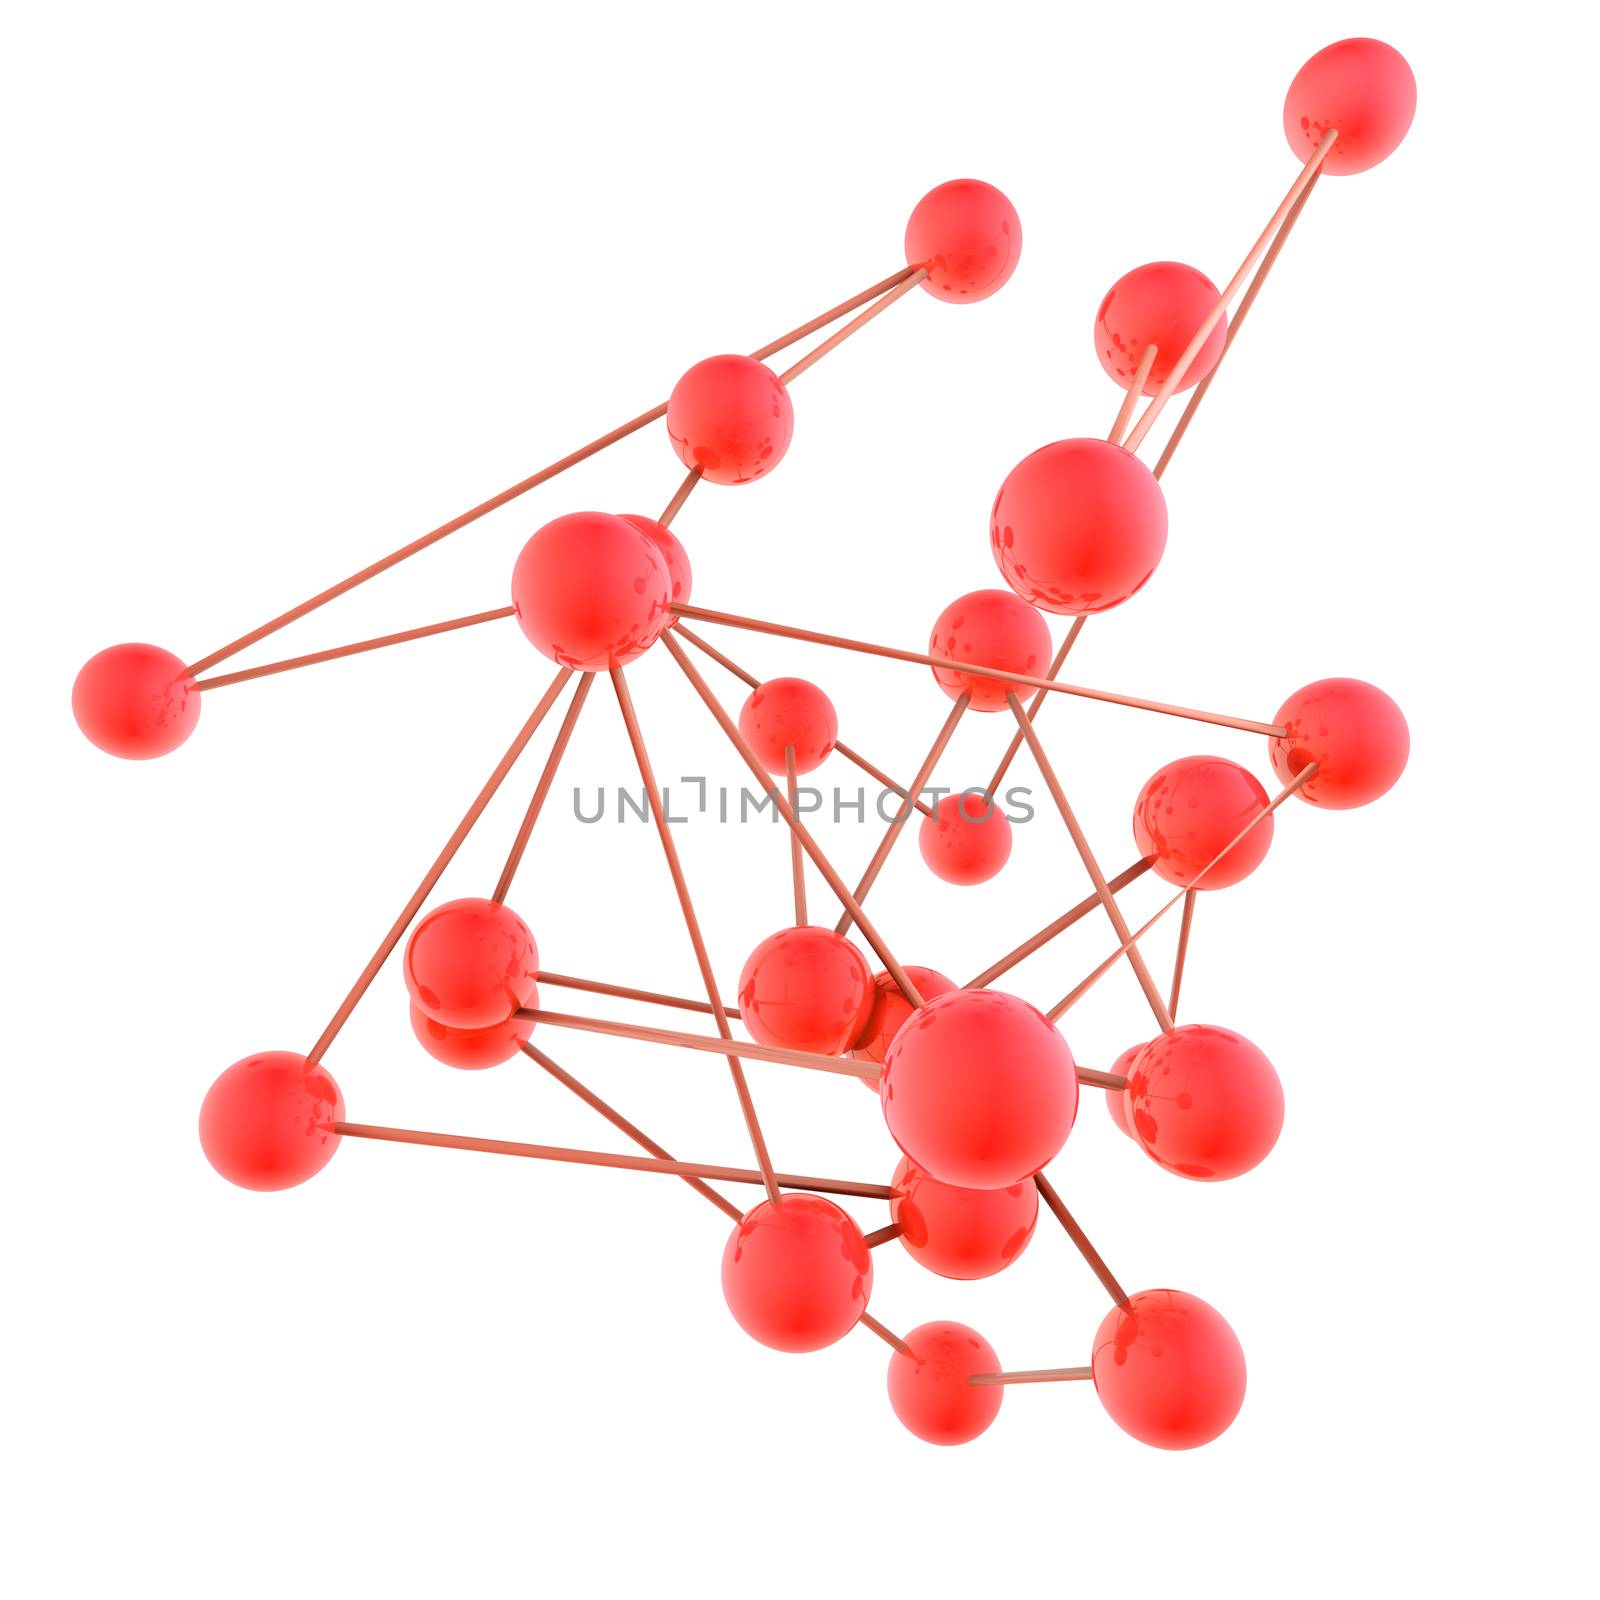 3d image of red diagram.Networking and internet concept.